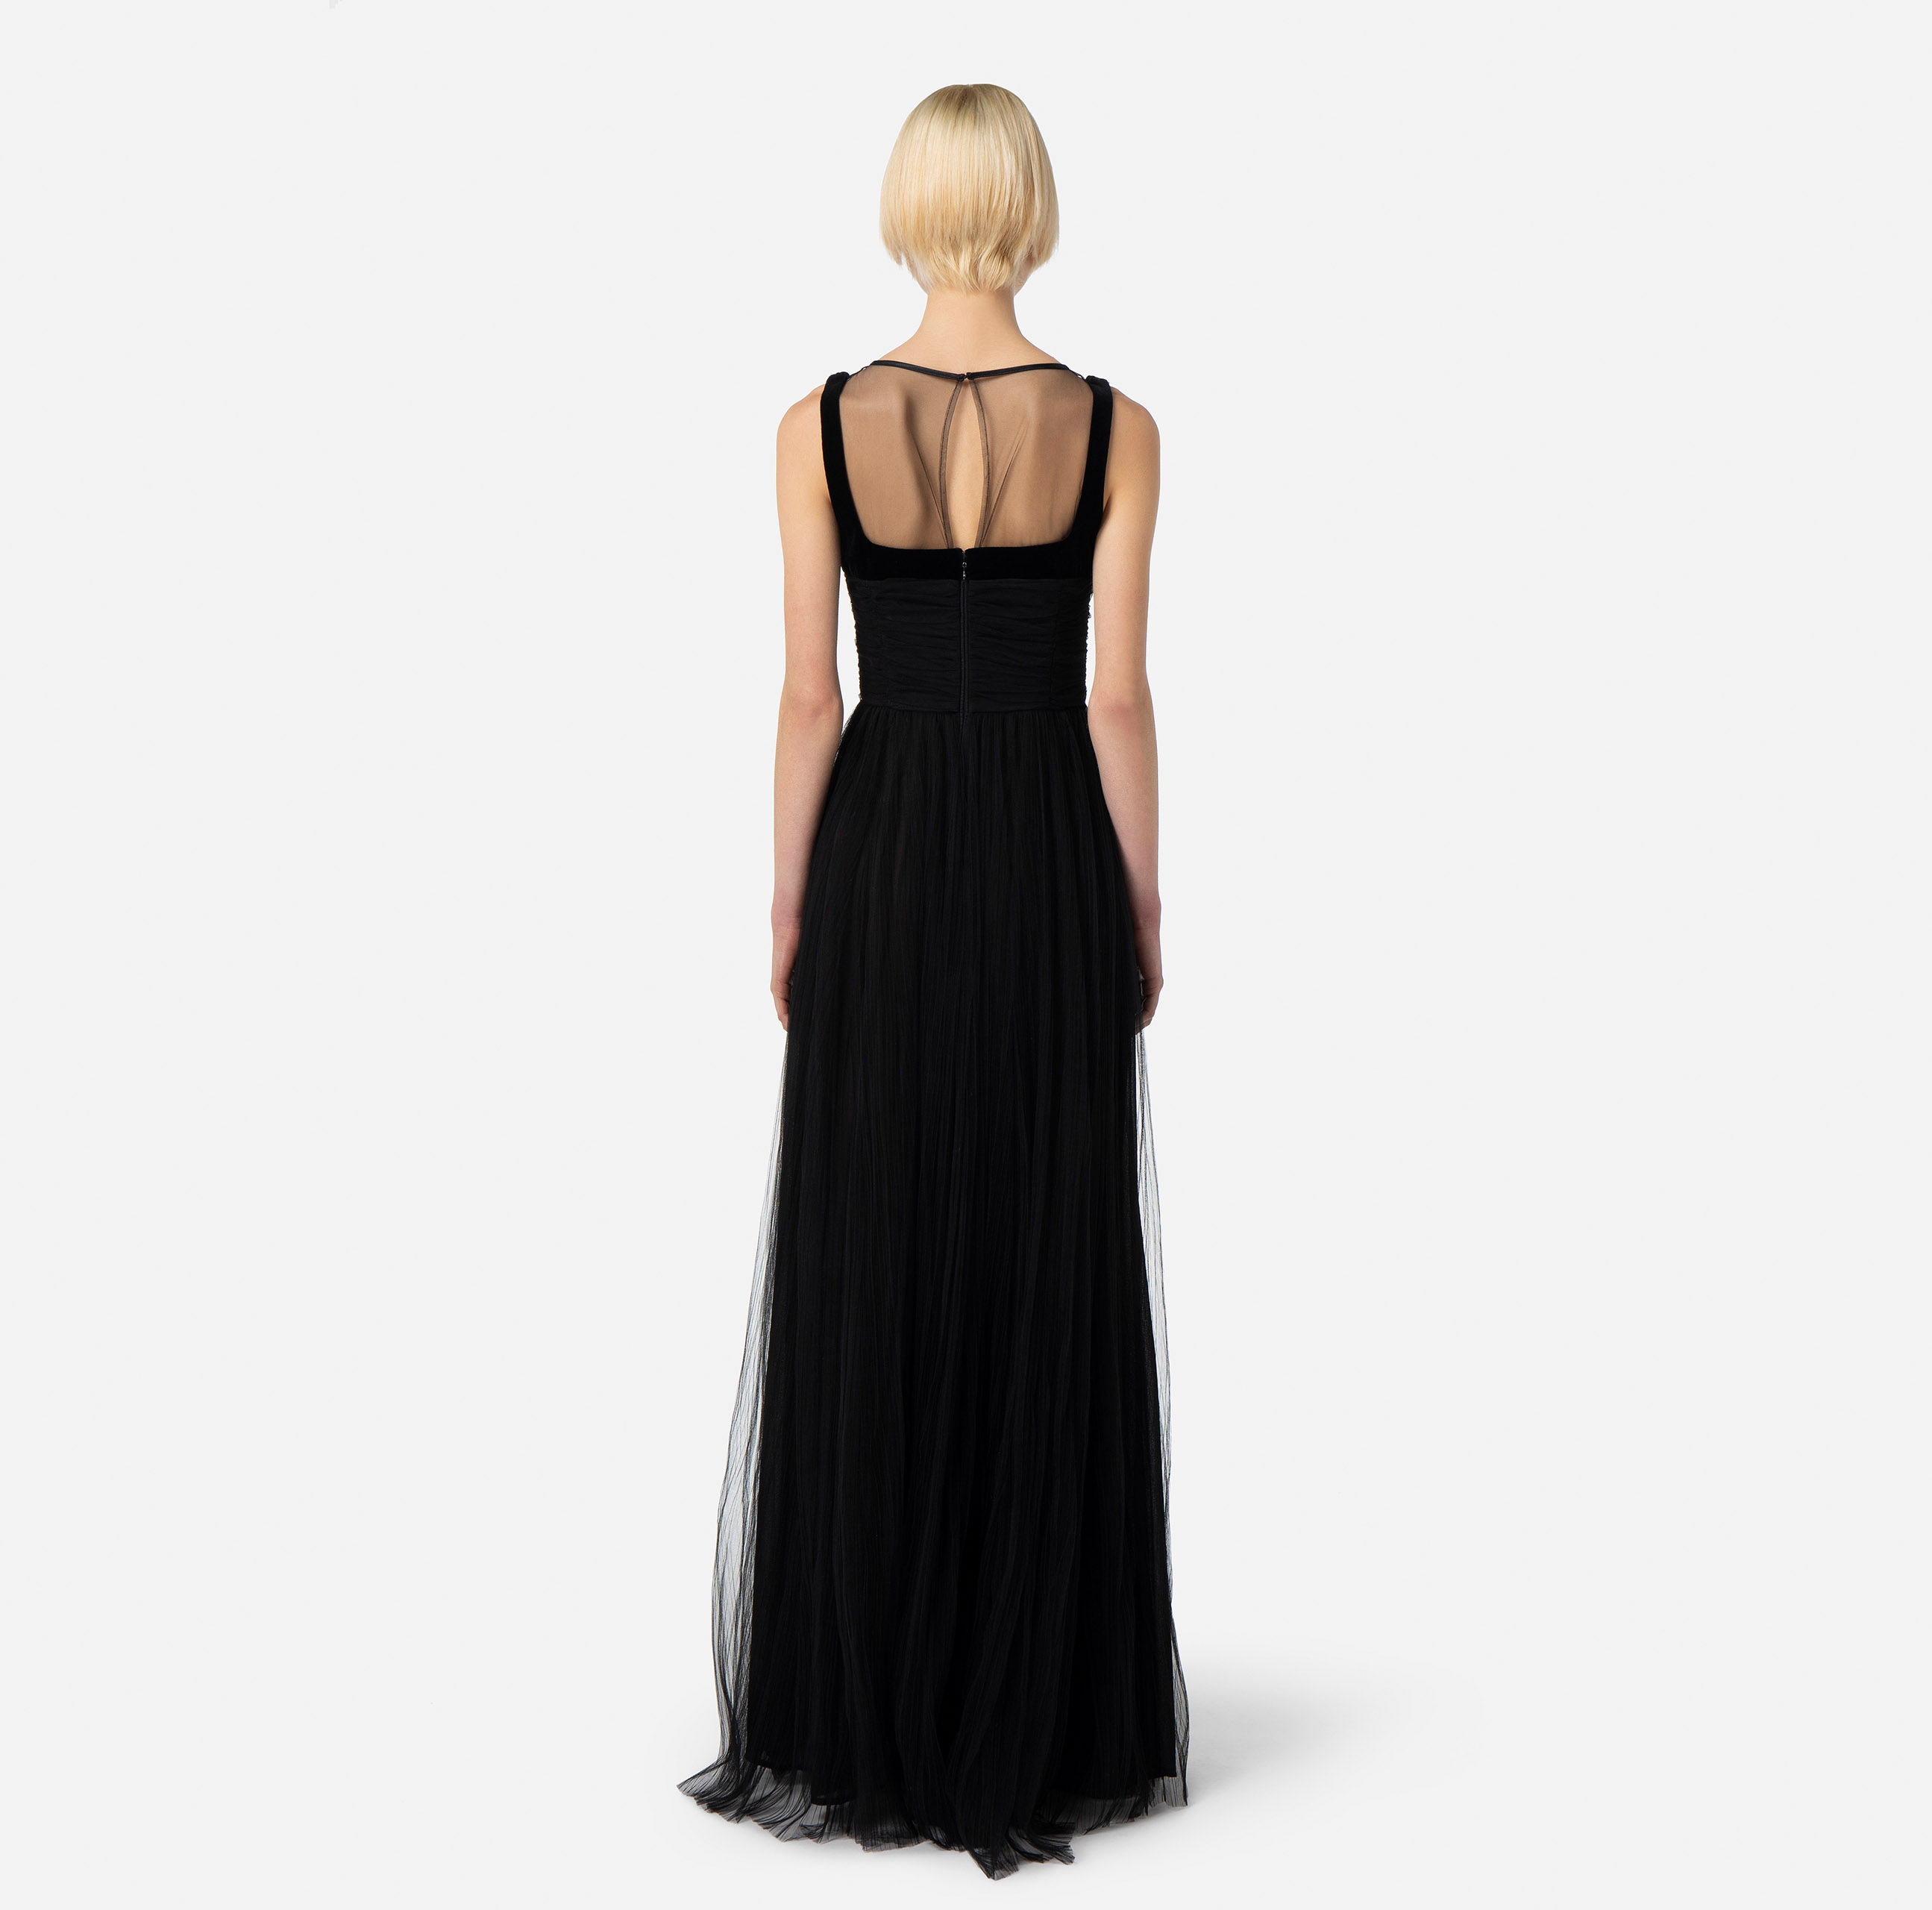 Red Carpet dress in pleated tulle fabric - Elisabetta Franchi